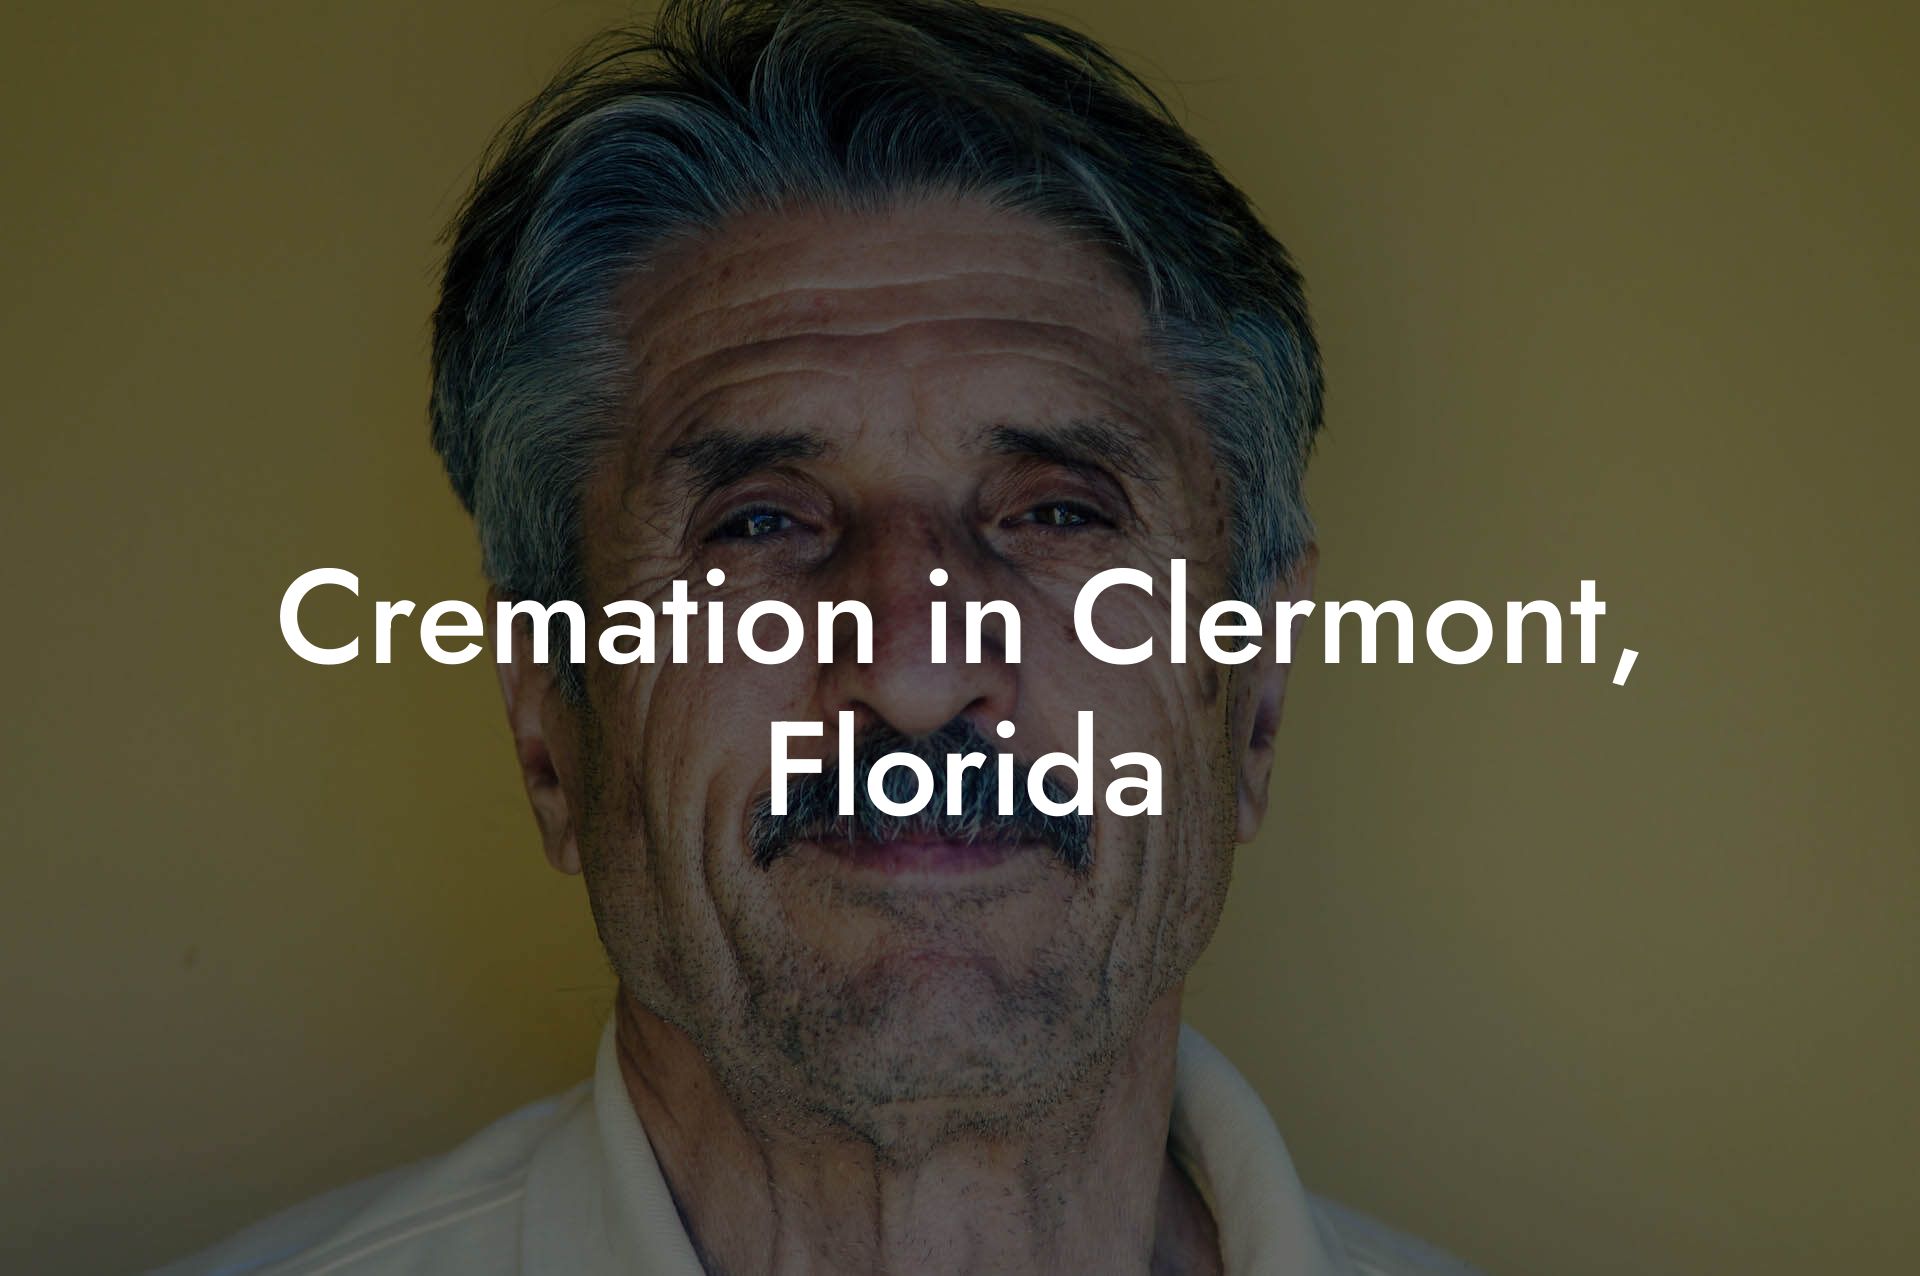 Cremation in Clermont, Florida